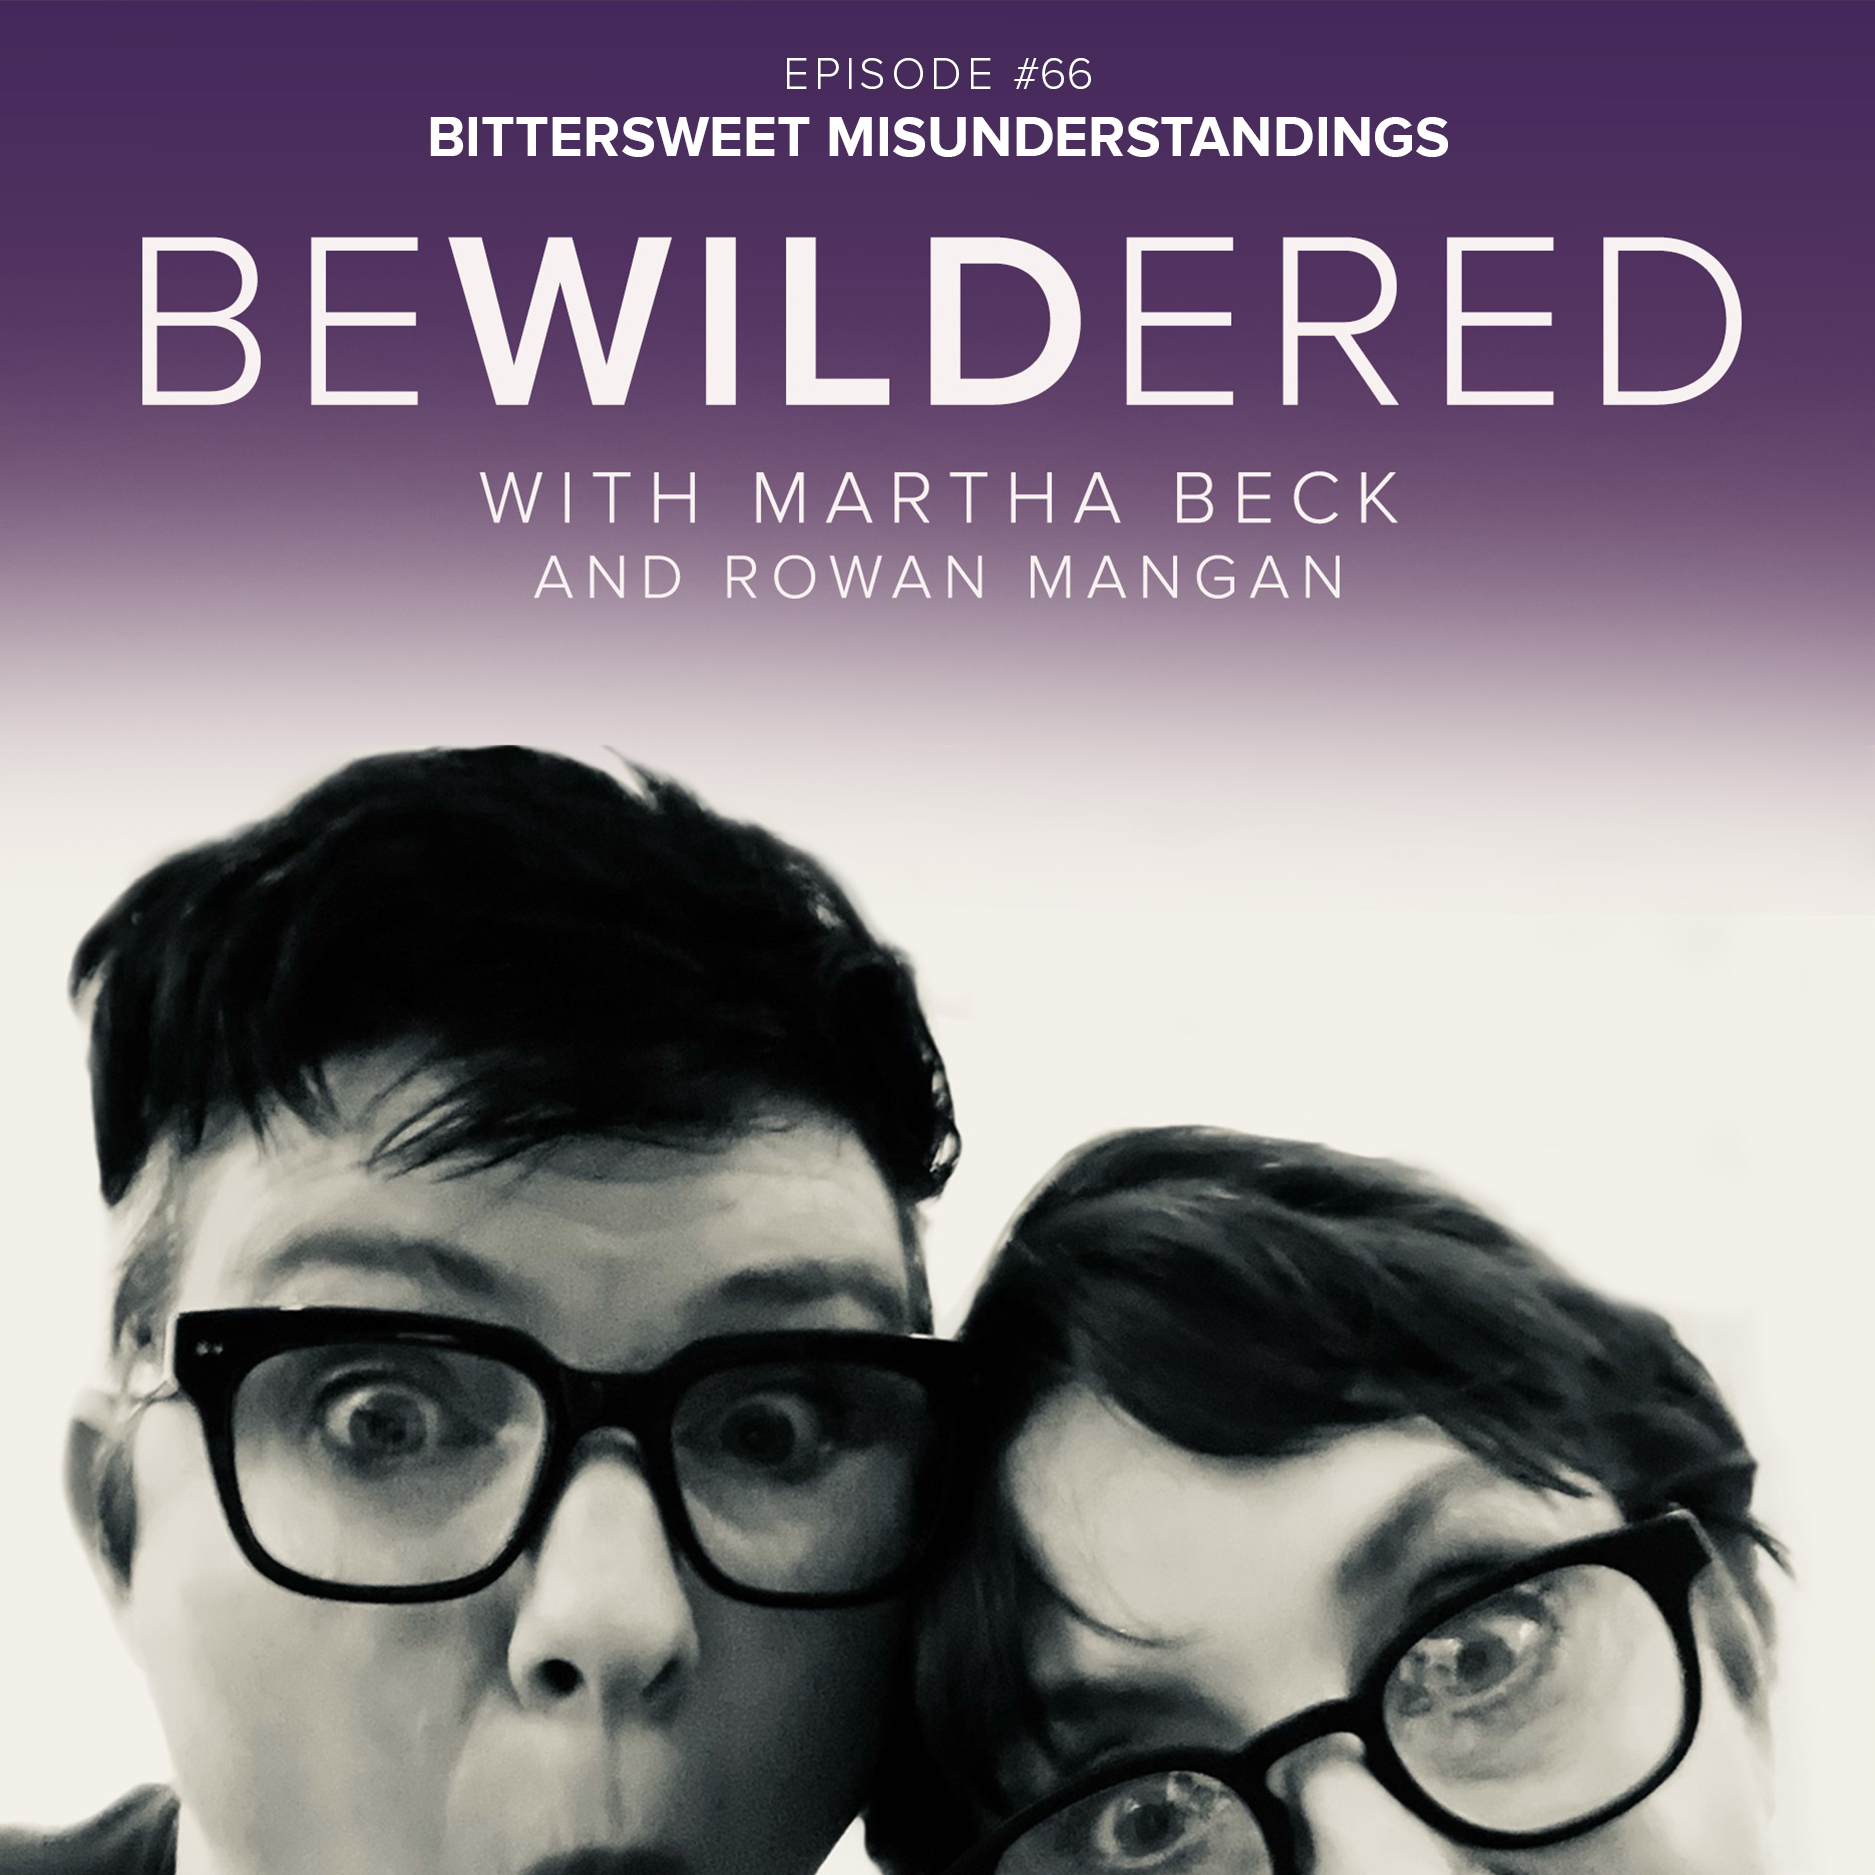 Image for Episode #66 Bittersweet Misunderstandings for the Bewildered Podcast with Martha Beck and Rowan Mangan